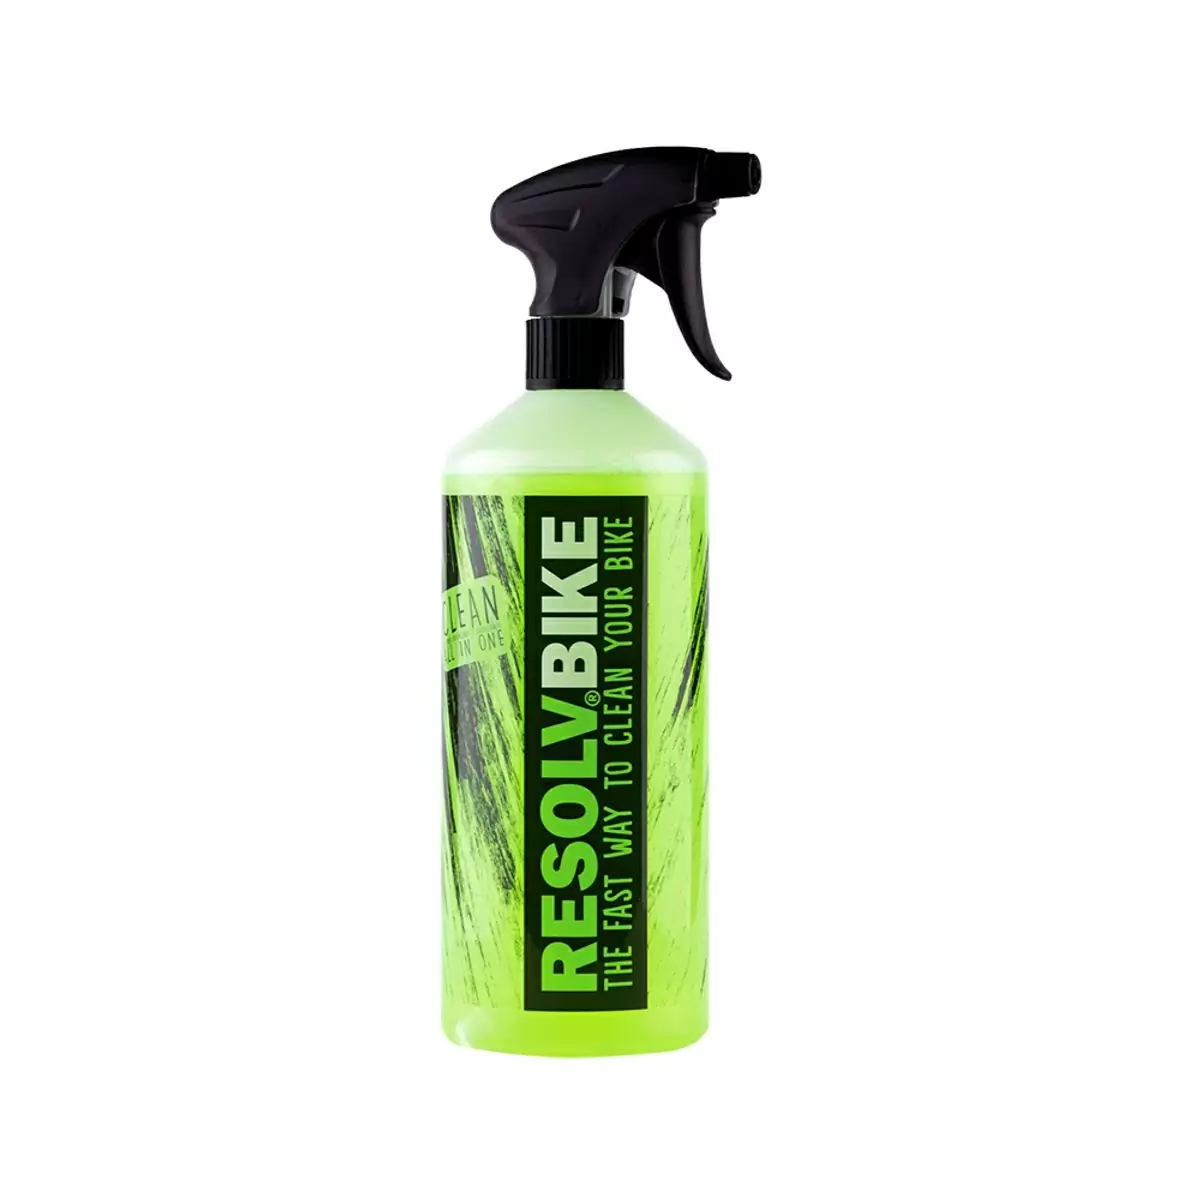 Clean Detergent For Bike Cleaning 1L - image